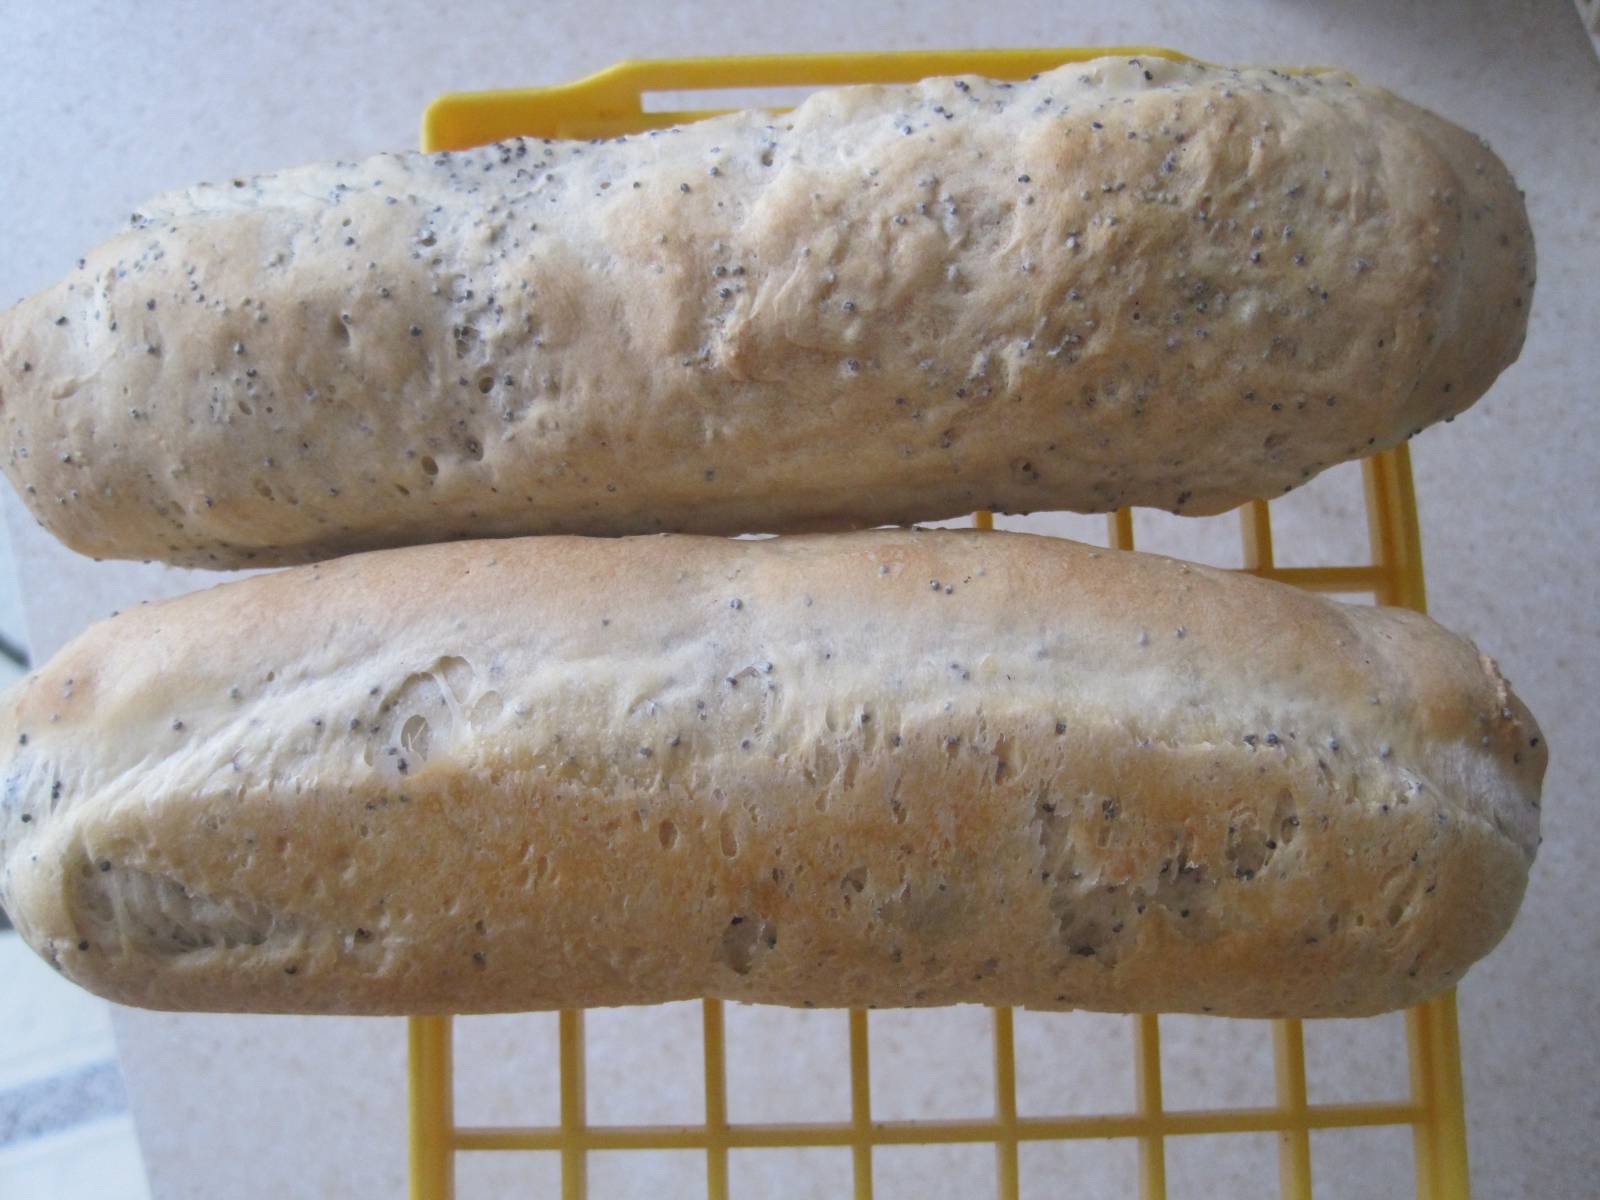 Mini cold dough baguettes in the oven